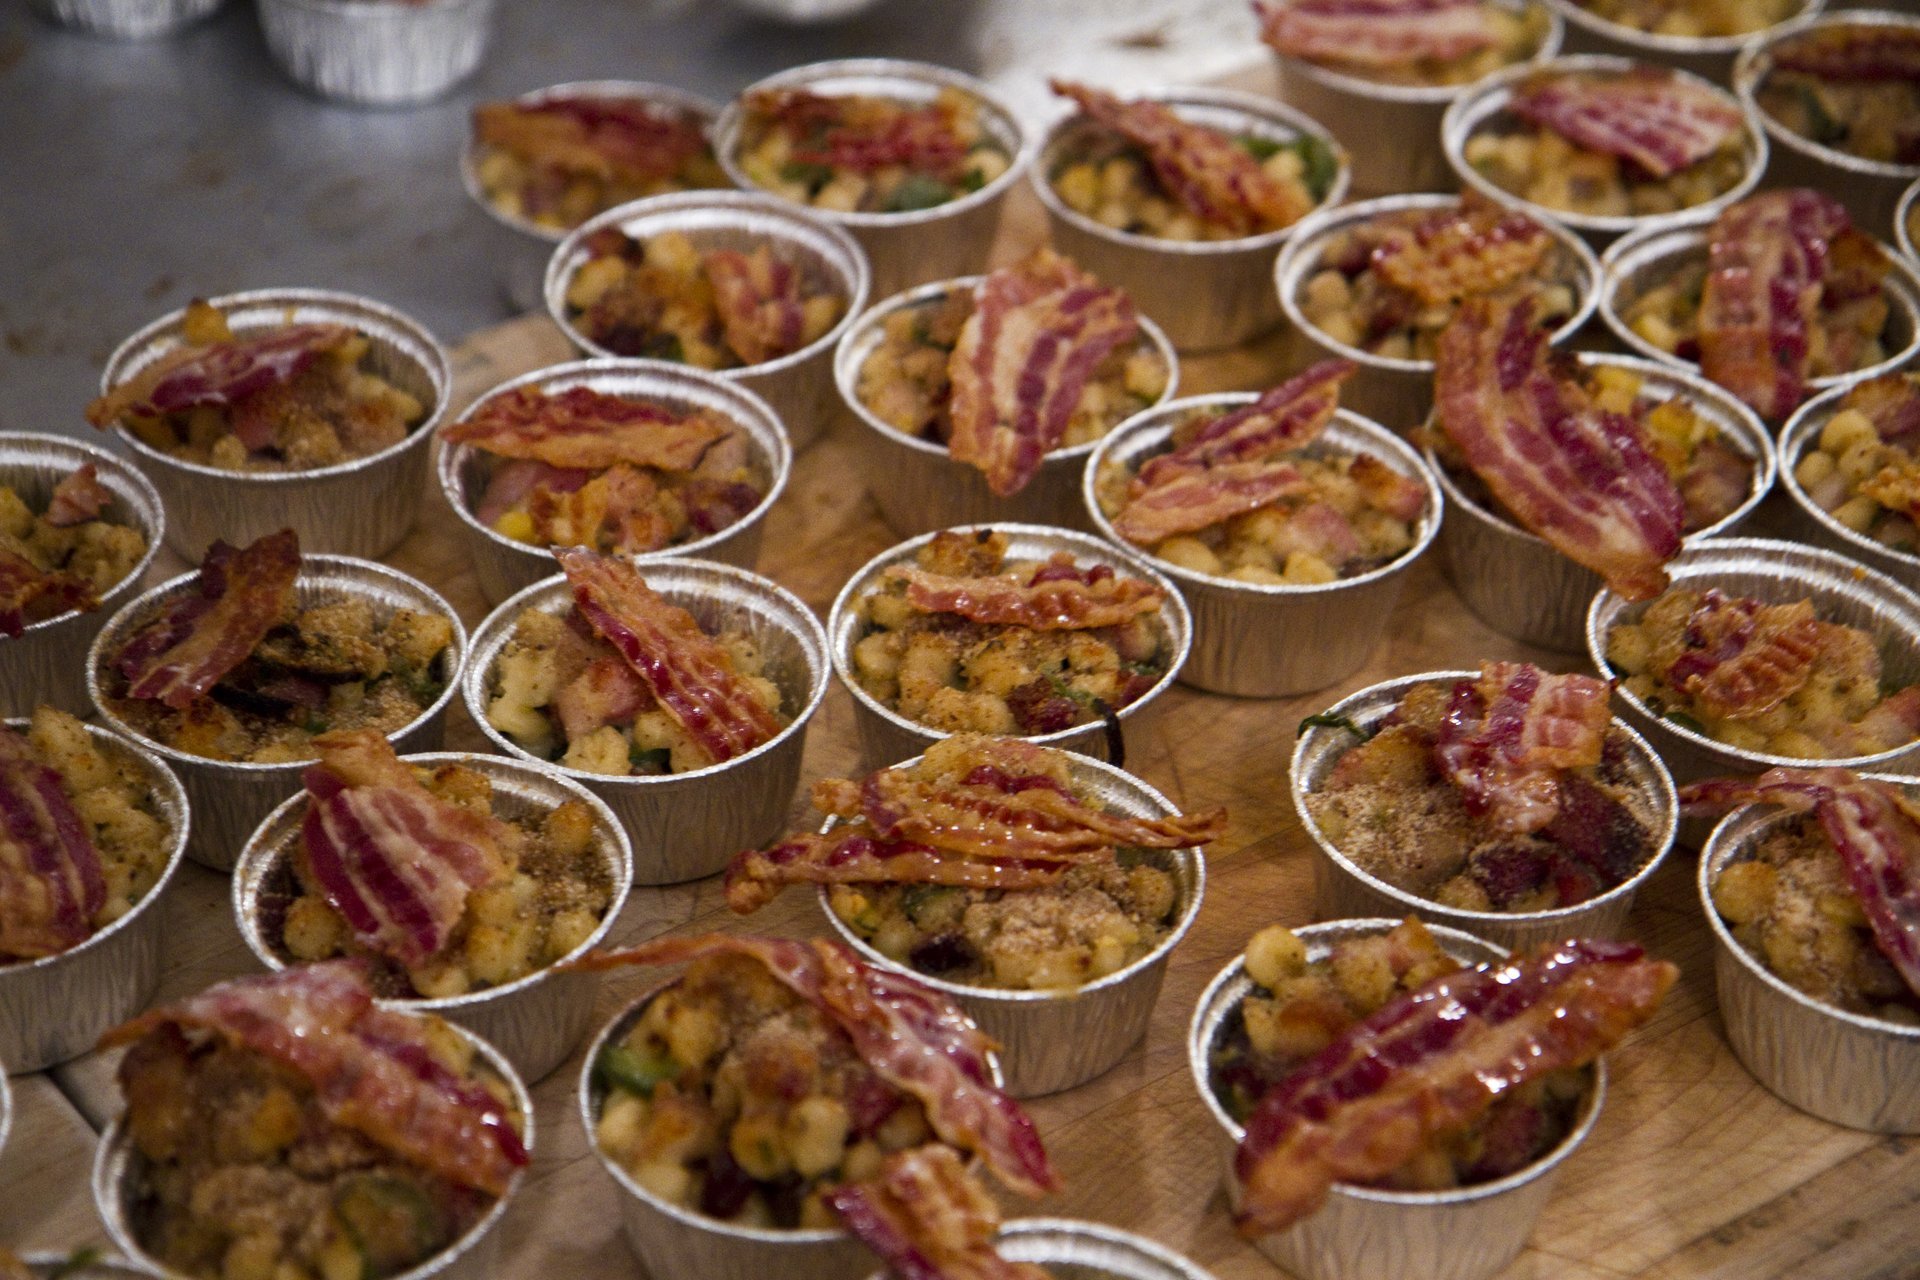 Baconfest 2019 in Chicago Dates